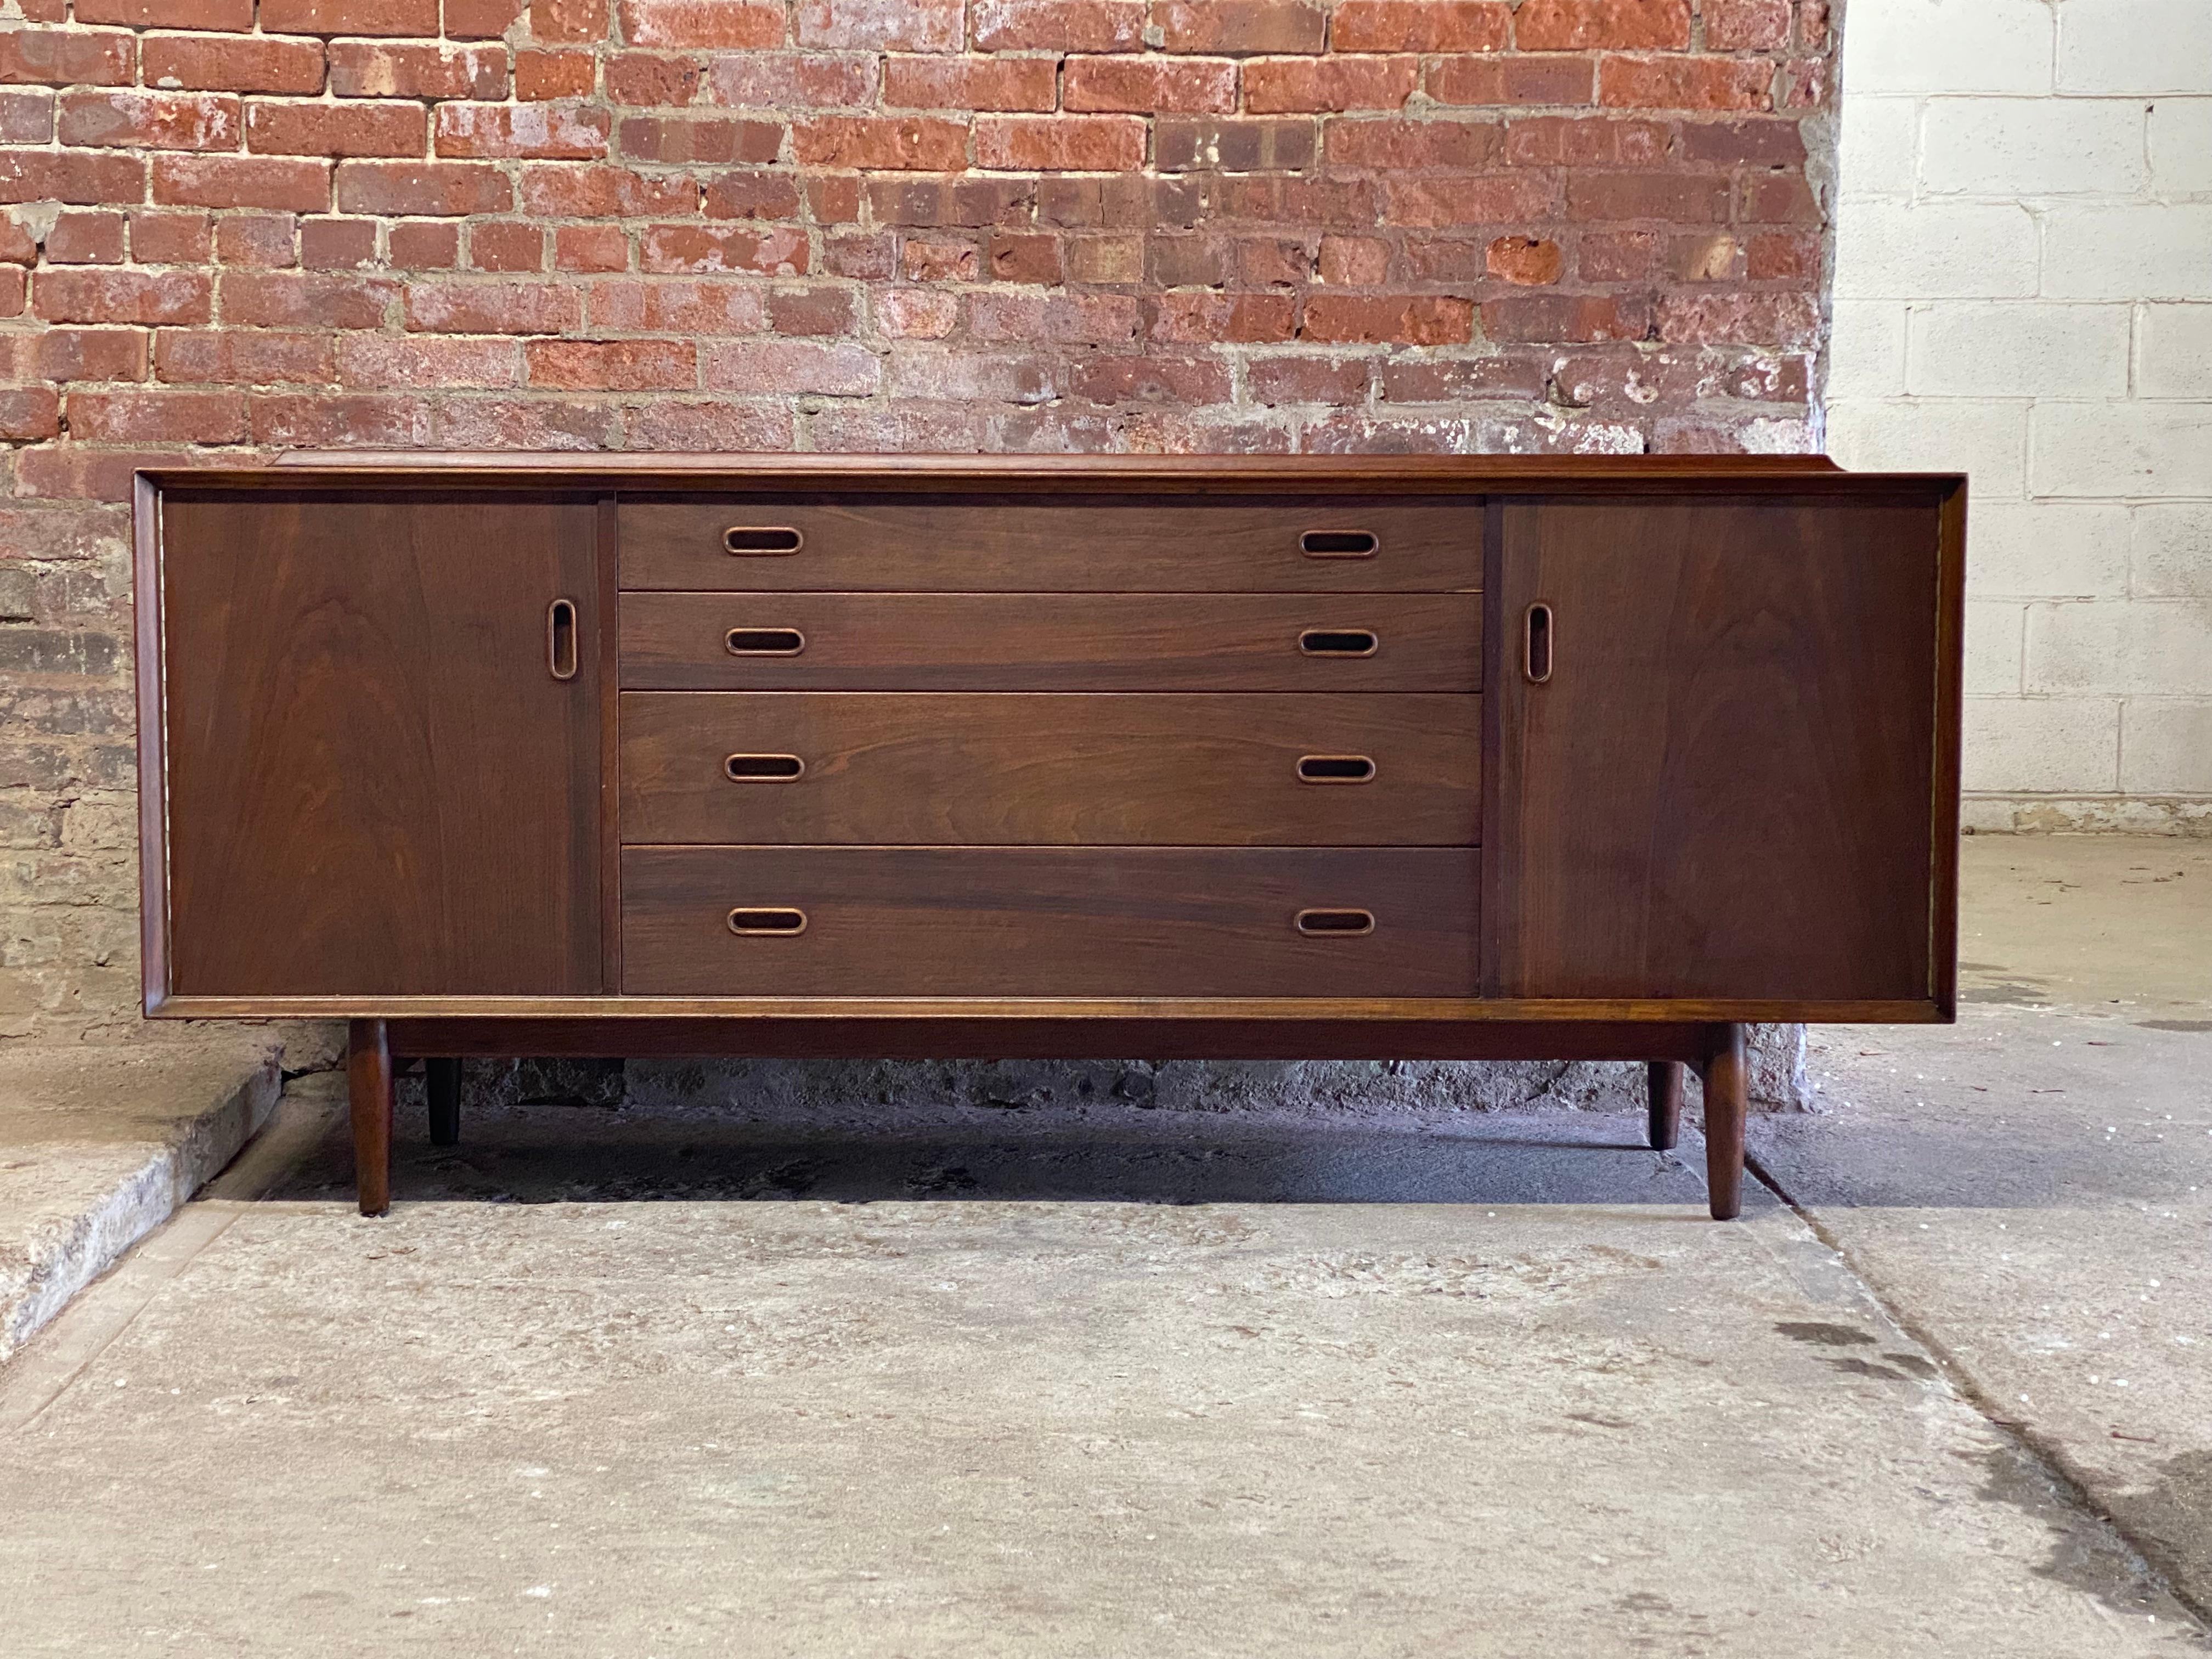 Arne Vodder for Sibast Mobler teak Triennale sideboard. Four drawers flanked by two doors with adjustable height interior shelves. The interior is maple or birch lined. The cabinet features beautifully figured teak veneers, recessed handles,